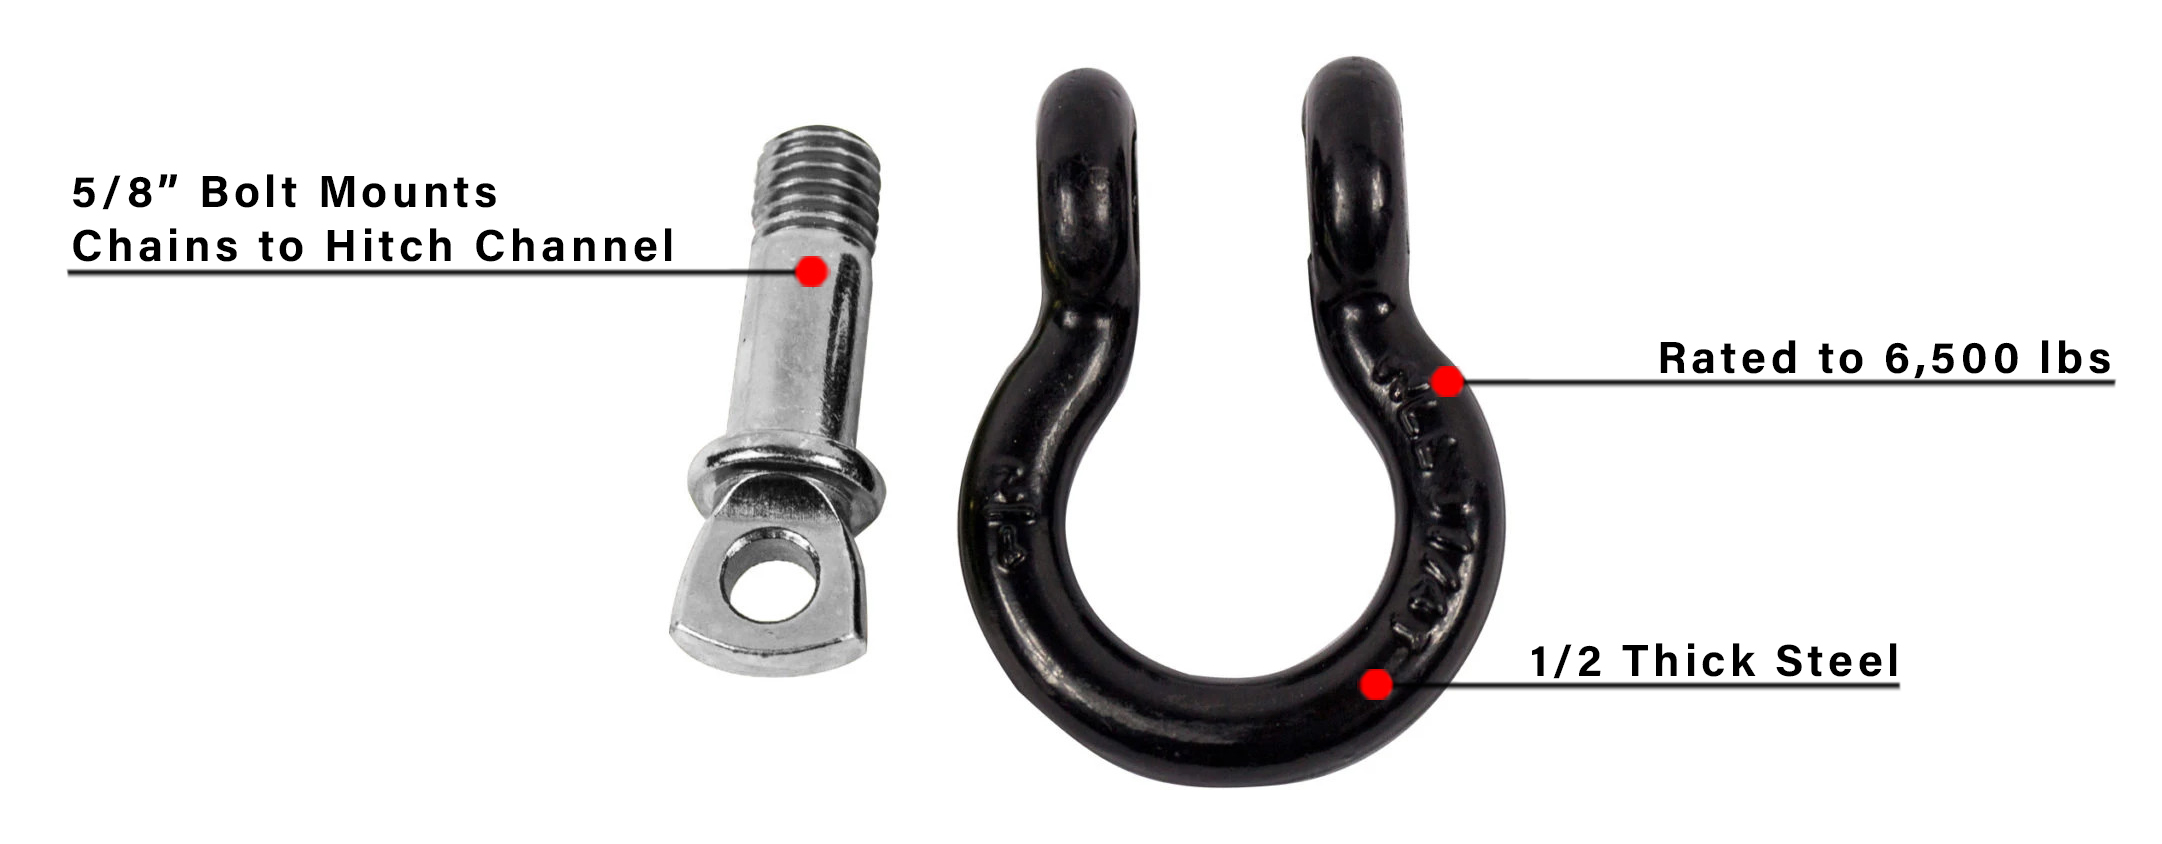 Bulletproof 5/8 Channel Shackles for Safety Chains (Pair)